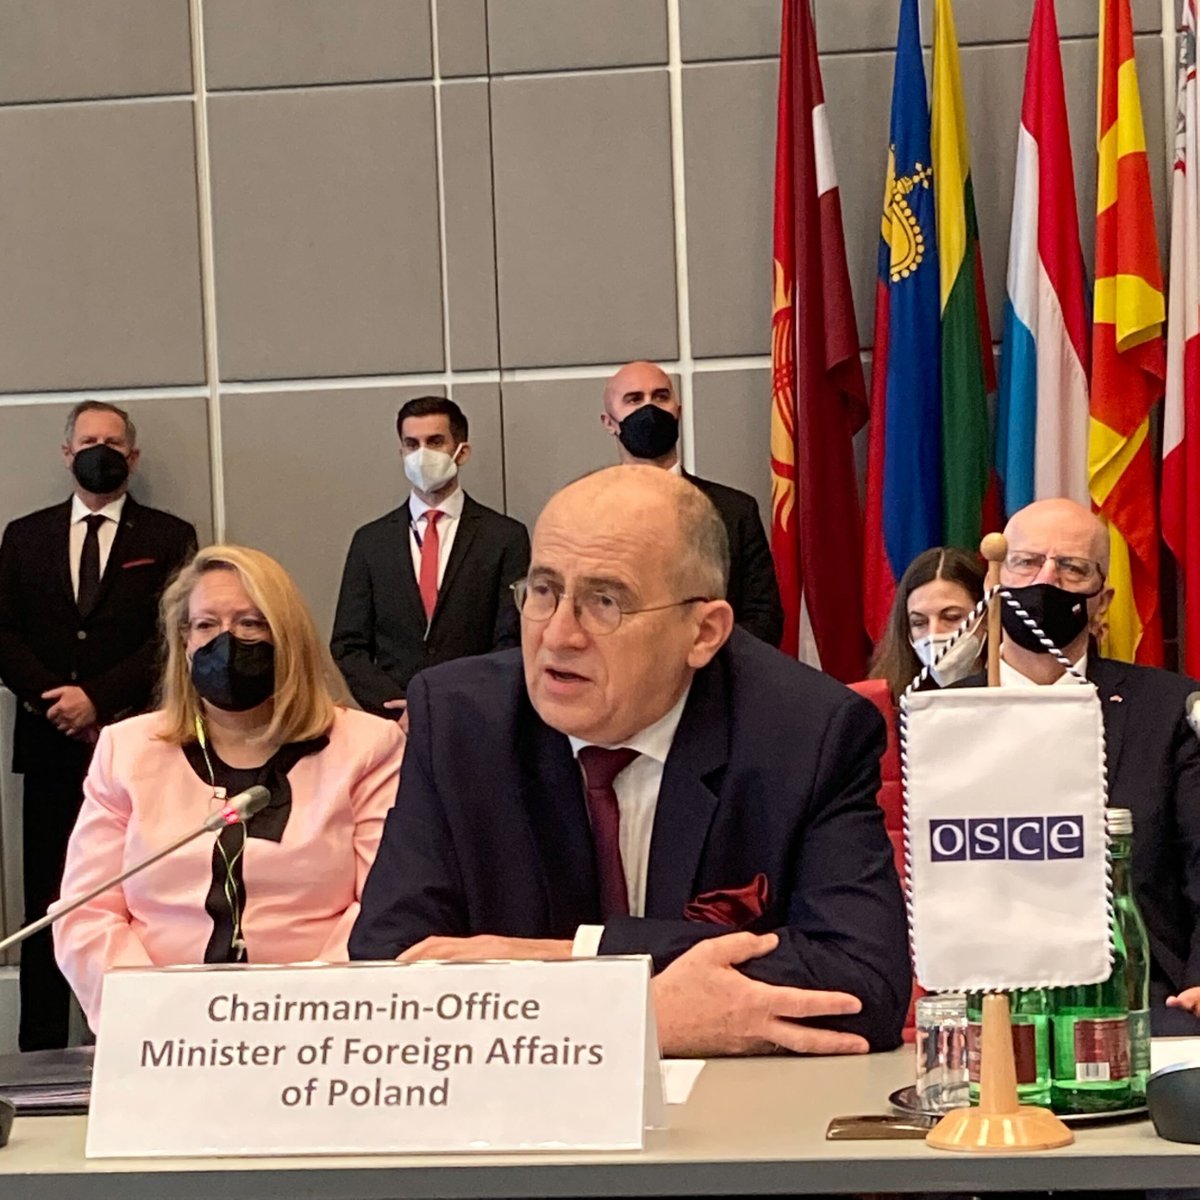 First meeting of the @OSCE Permanent Council in 2022. @RauZbigniew as the new Chair-in-Office PolandPoland, is presenting Poland's priorities for the year ahead